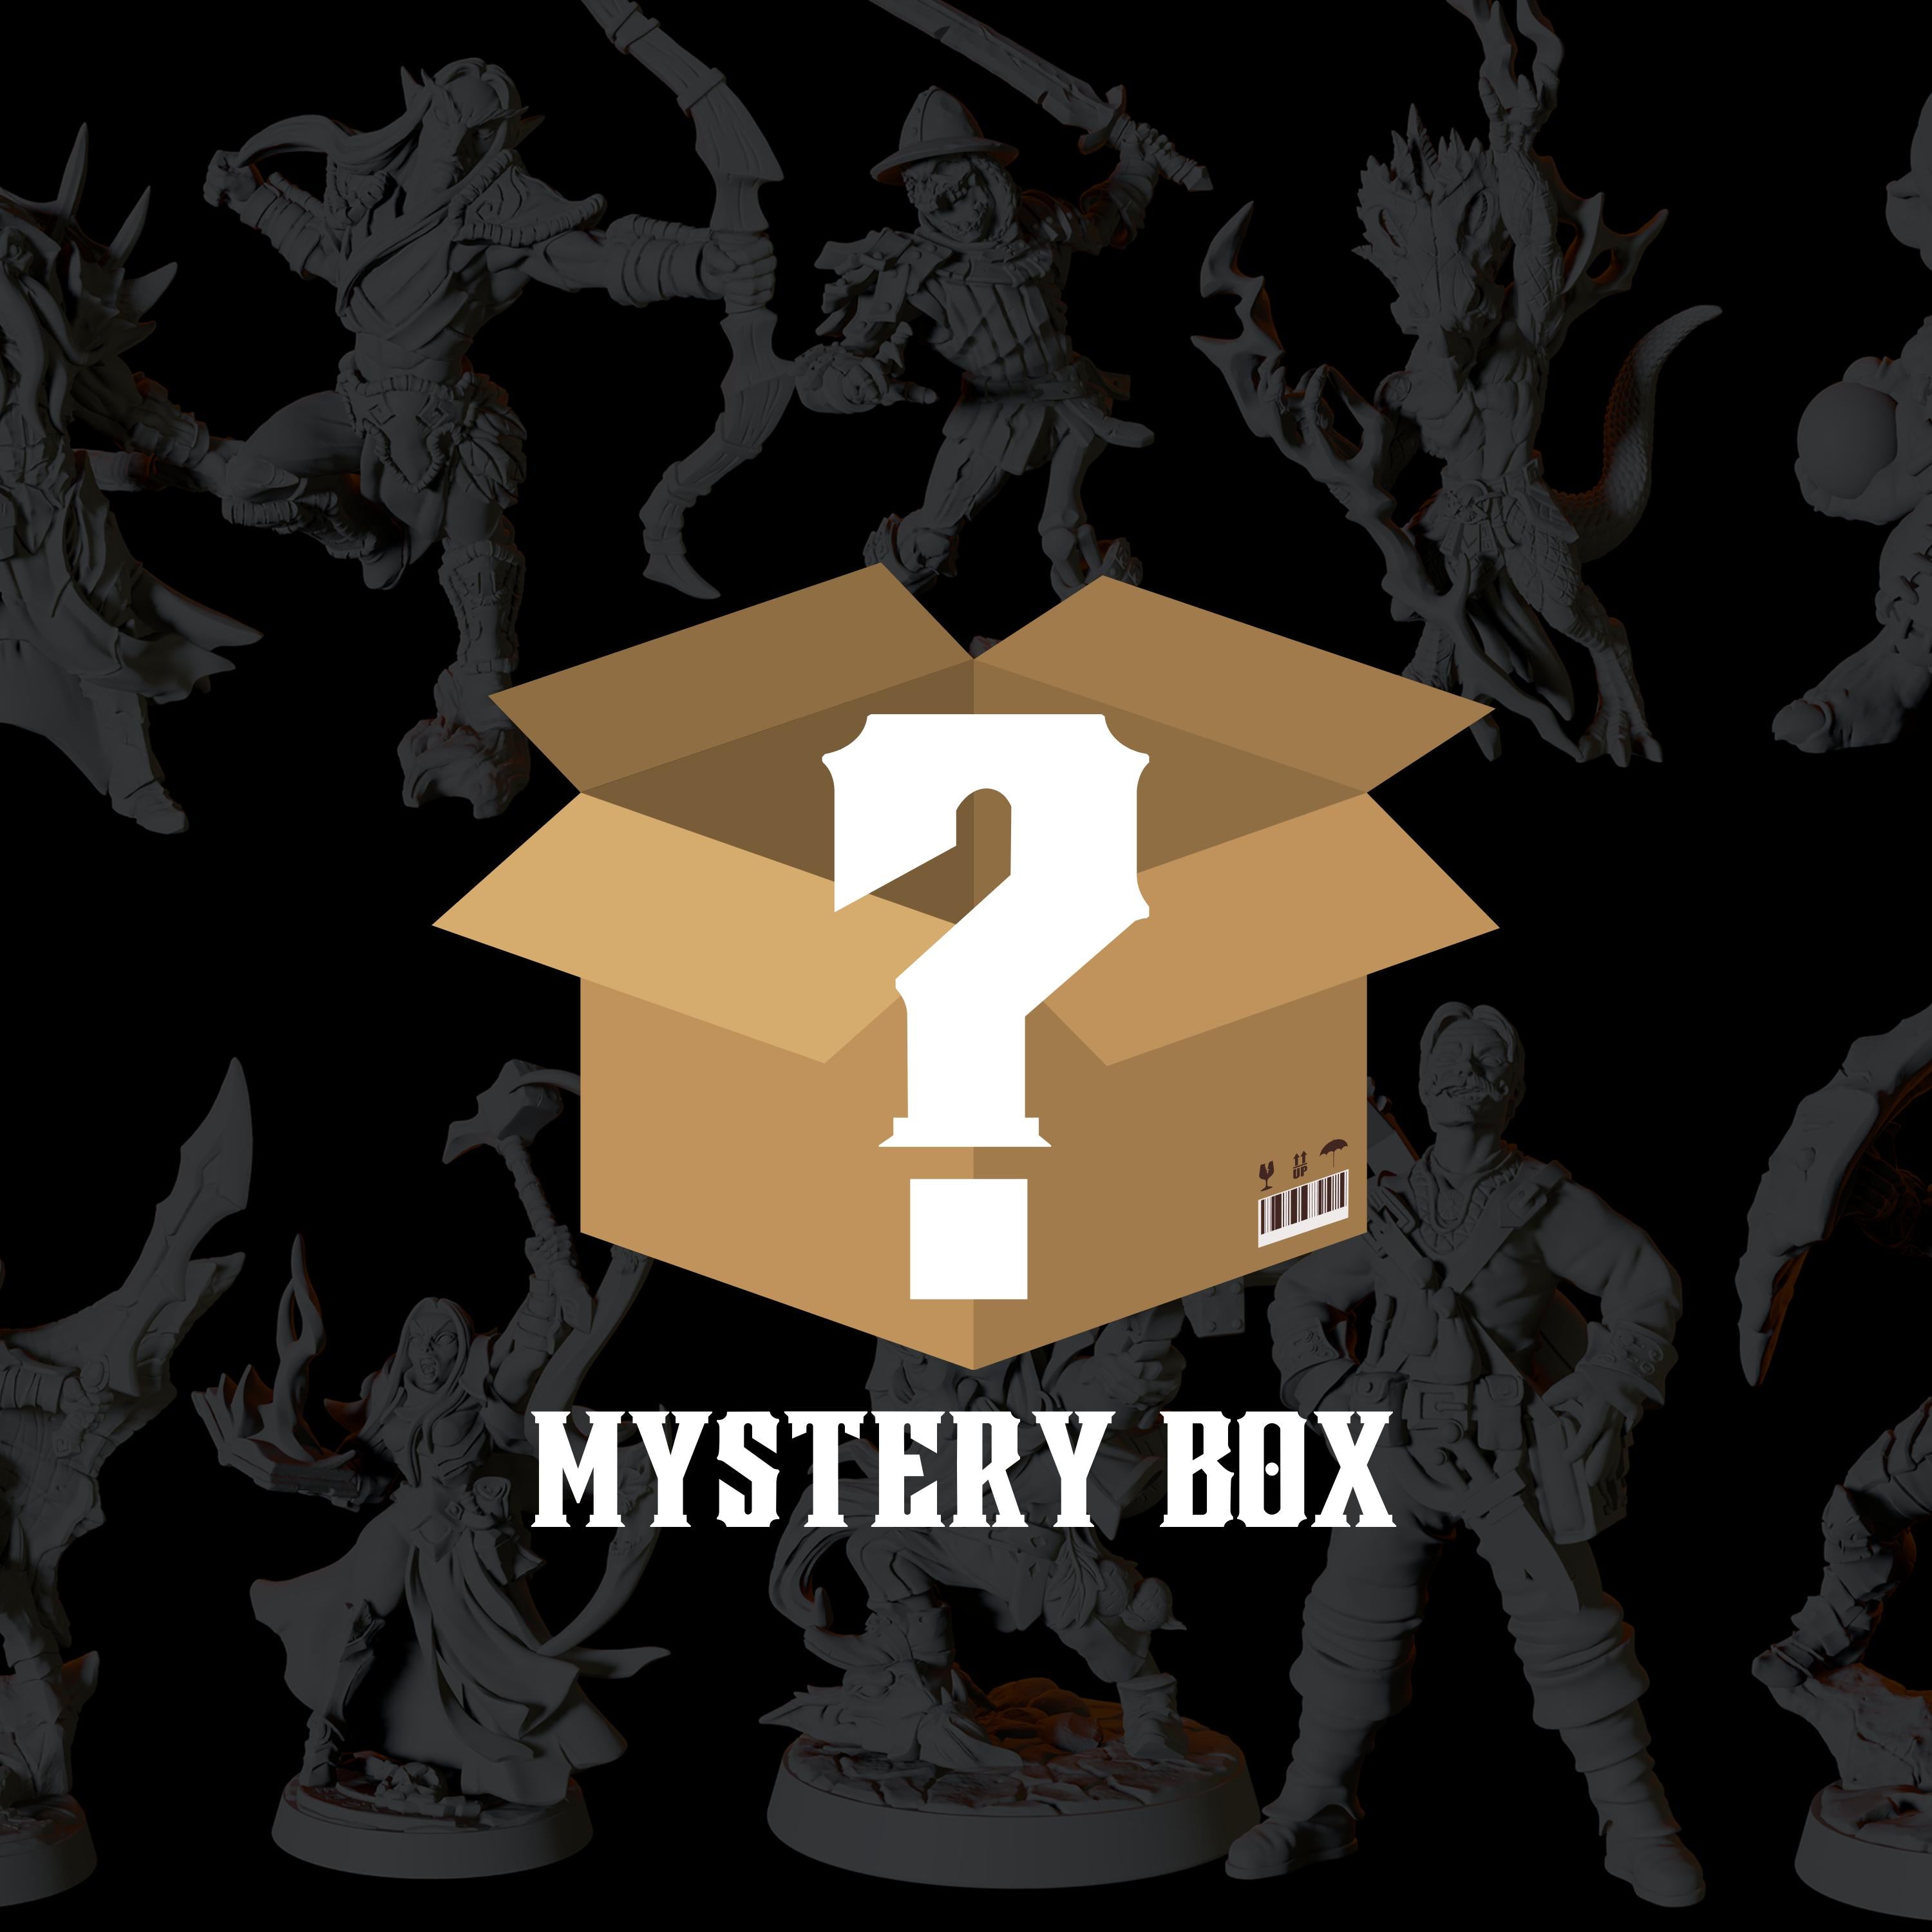 Miniature Subscription Box Miniature for Dungeons and Dragons